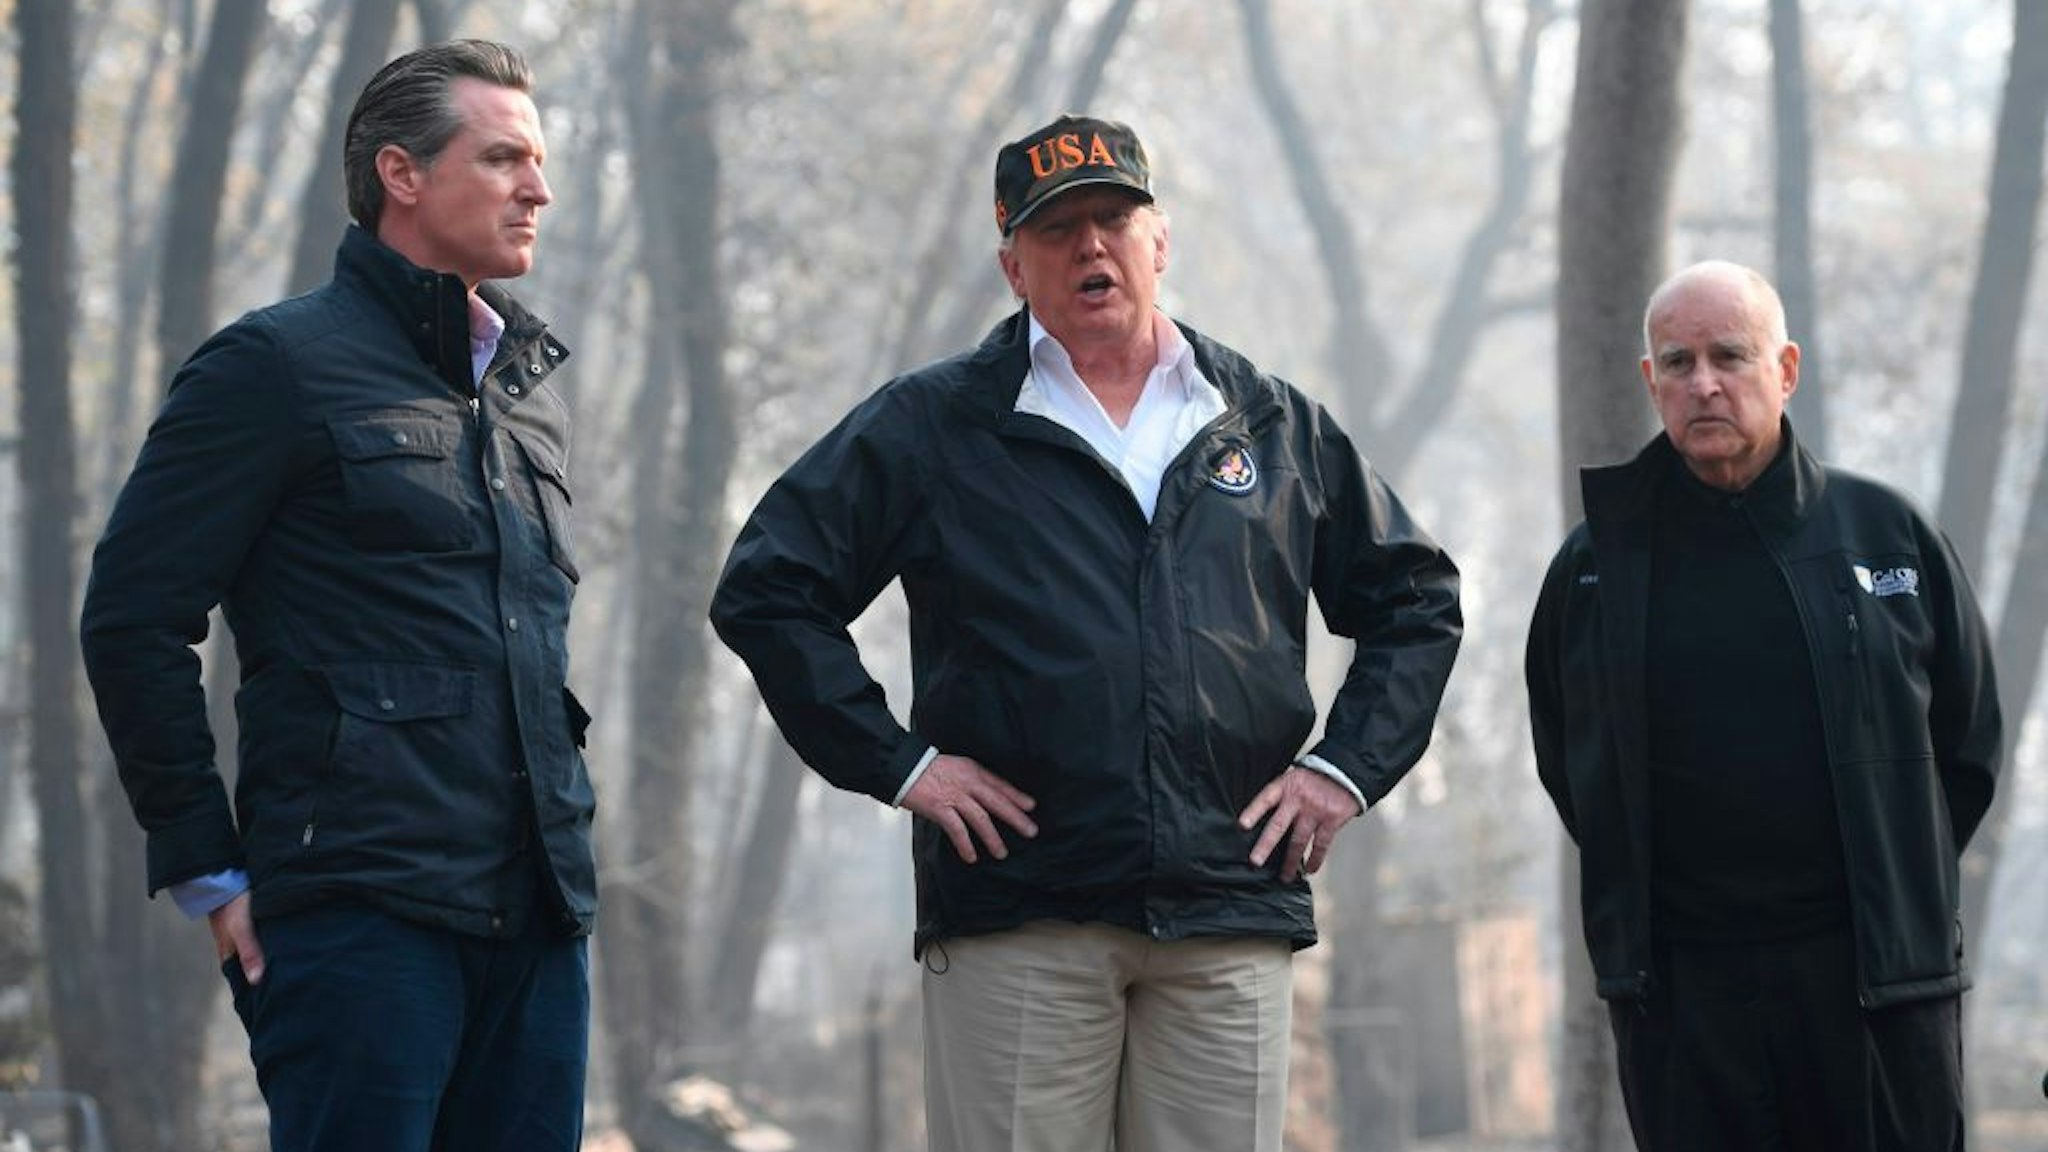 US President Donald Trump (C) looks on with Governor of California Jerry Brown (R) and Lieutenant Governor of California, Gavin Newsom, as they view damage from wildfires in Paradise, California on November 17, 2018. - President Donald Trump arrived in California to meet with officials, victims and the "unbelievably brave" firefighters there, as more than 1,000 people remain listed as missing in the worst-ever wildfire to hit the US state. (Photo by SAUL LOEB / AFP) (Photo credit should read SAUL LOEB/AFP via Getty Images)